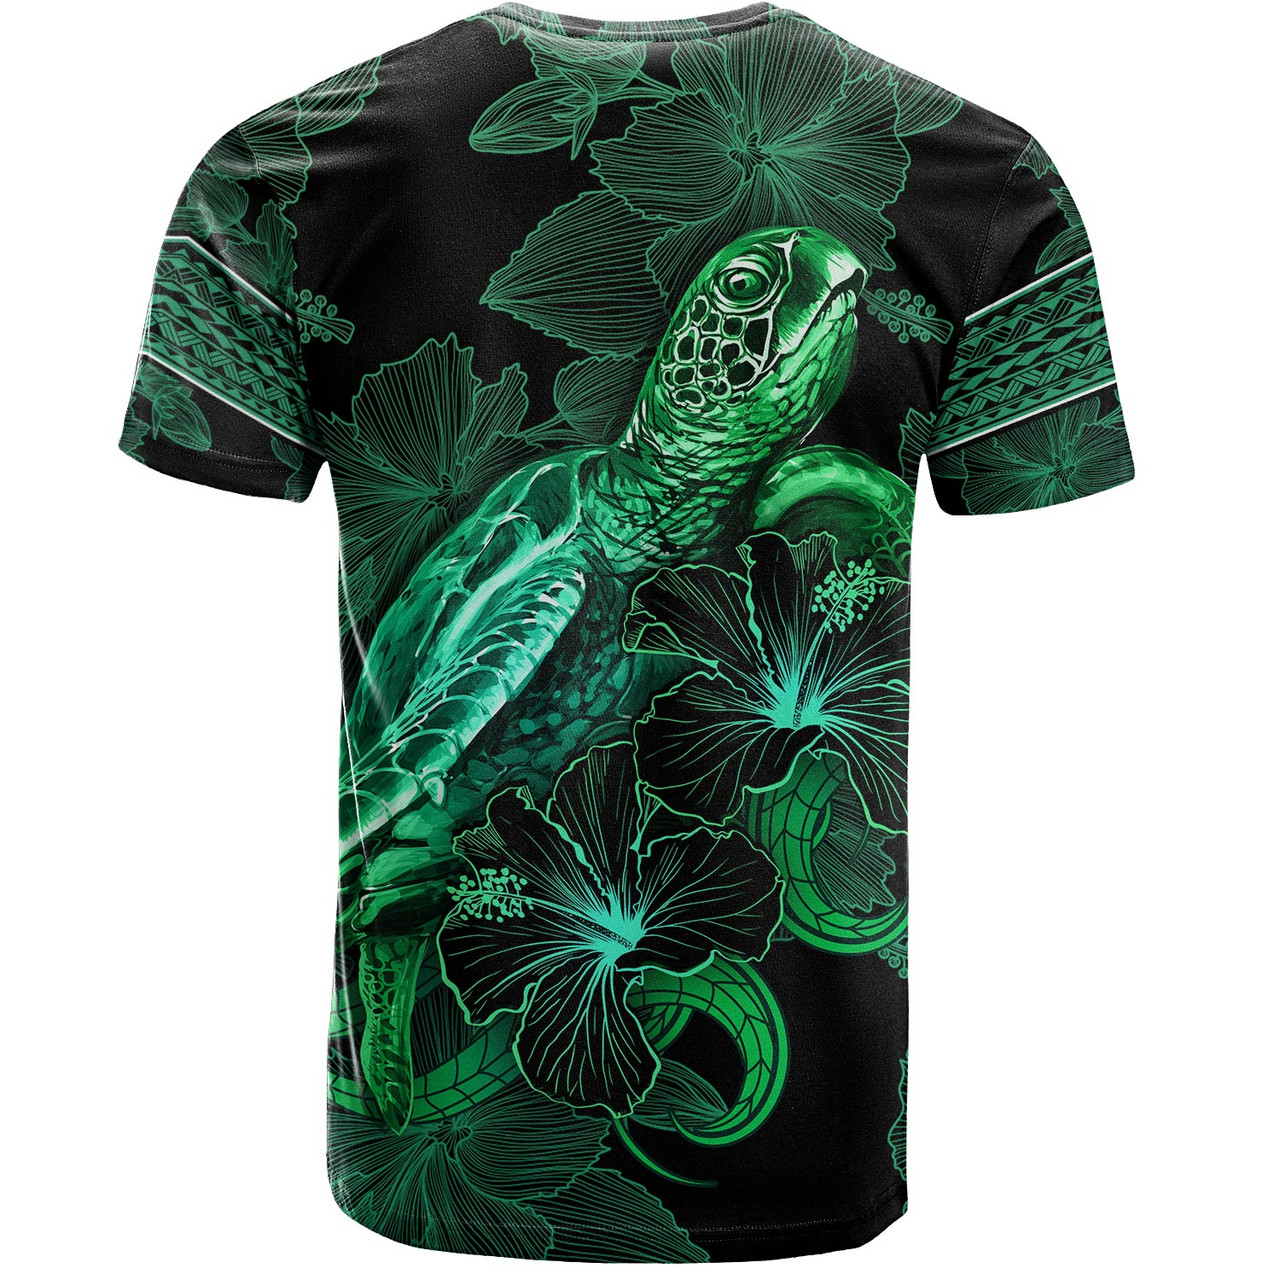 Fiji T-Shirt  Sea Turtle With Blooming Hibiscus Flowers Tribal Green